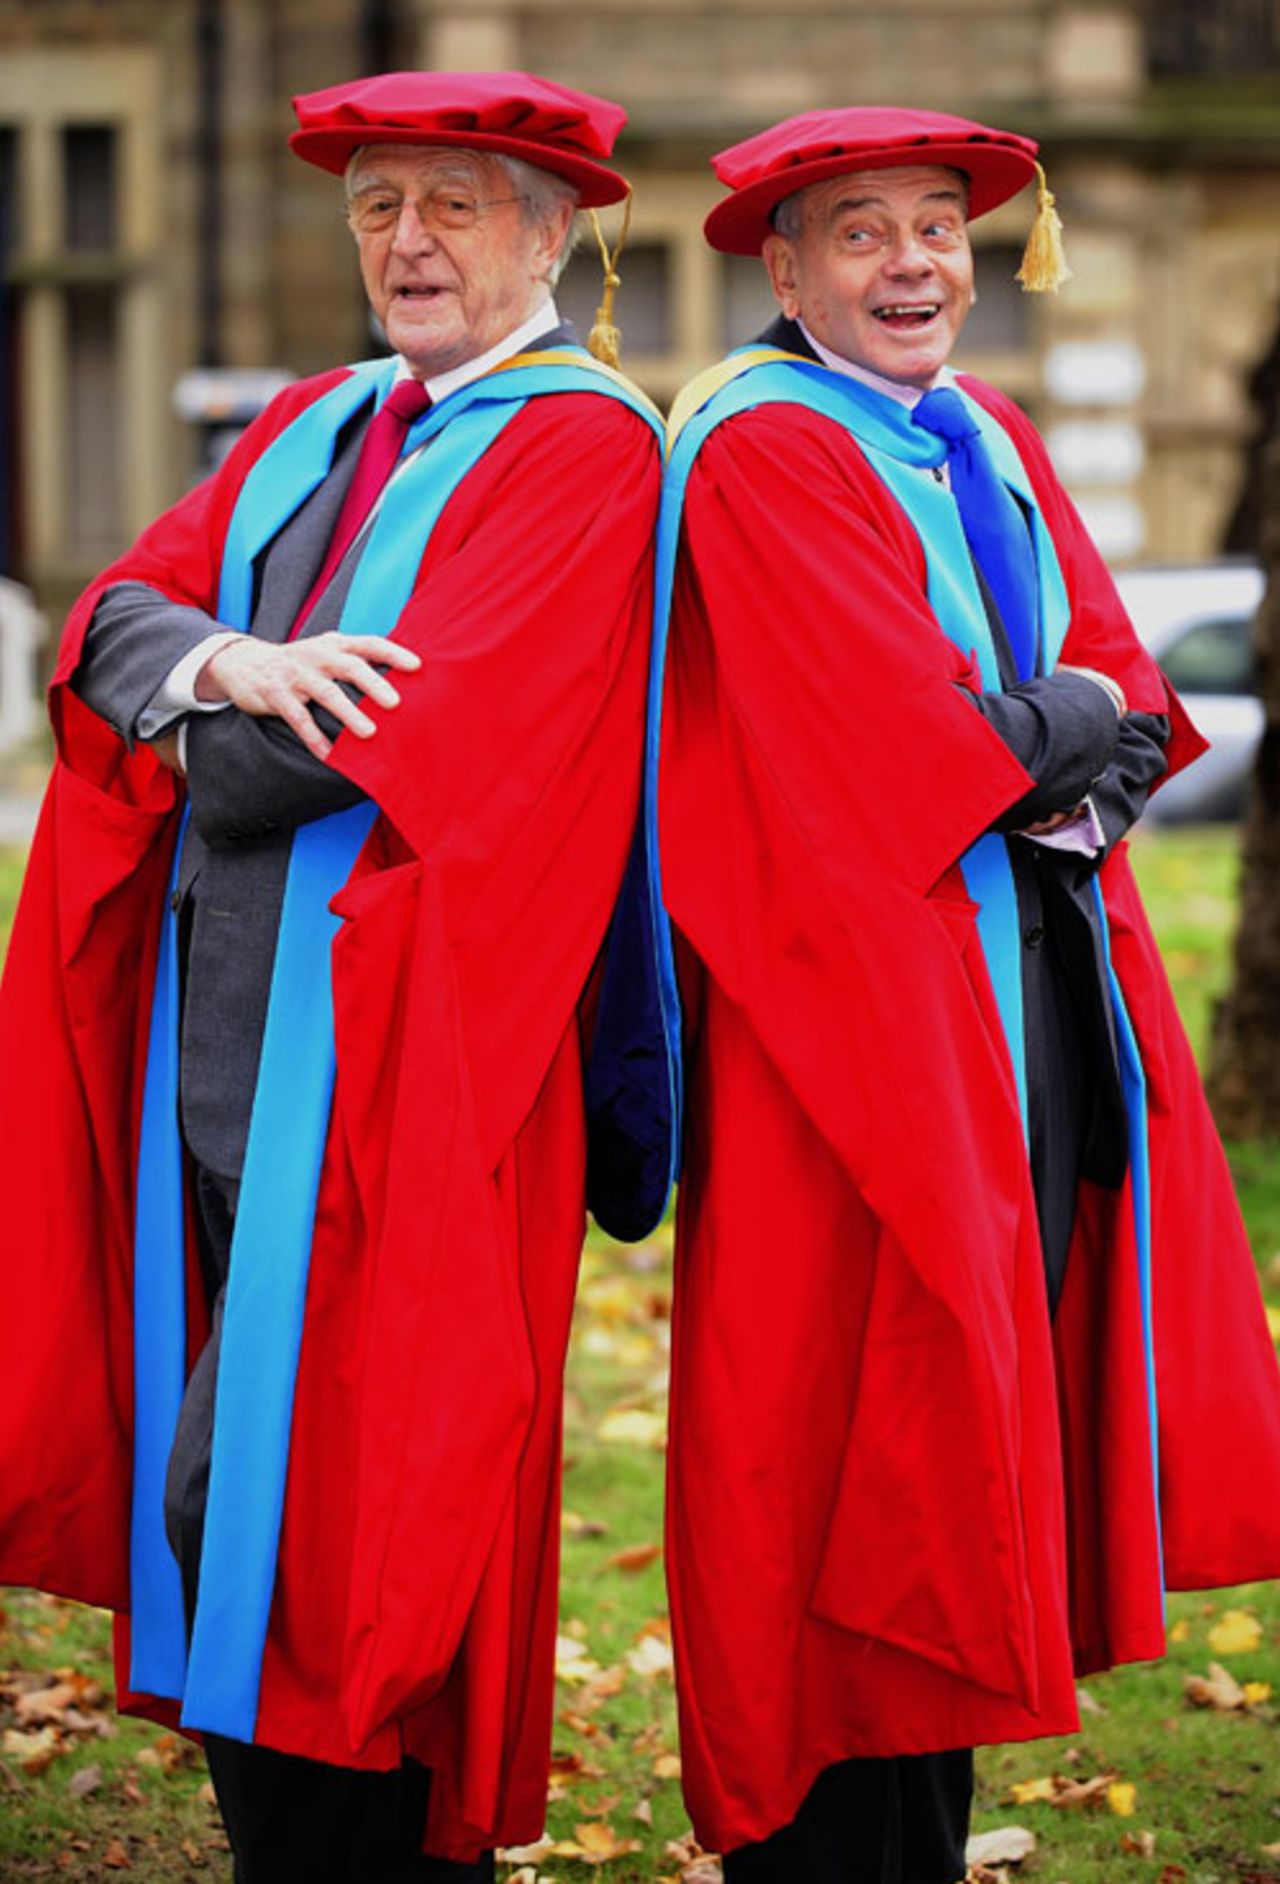 Sir Michael Parkinson and Dickie Bird at the Huddersfield University campus in Barnsley, where they received honorary doctorates, November 18,2008